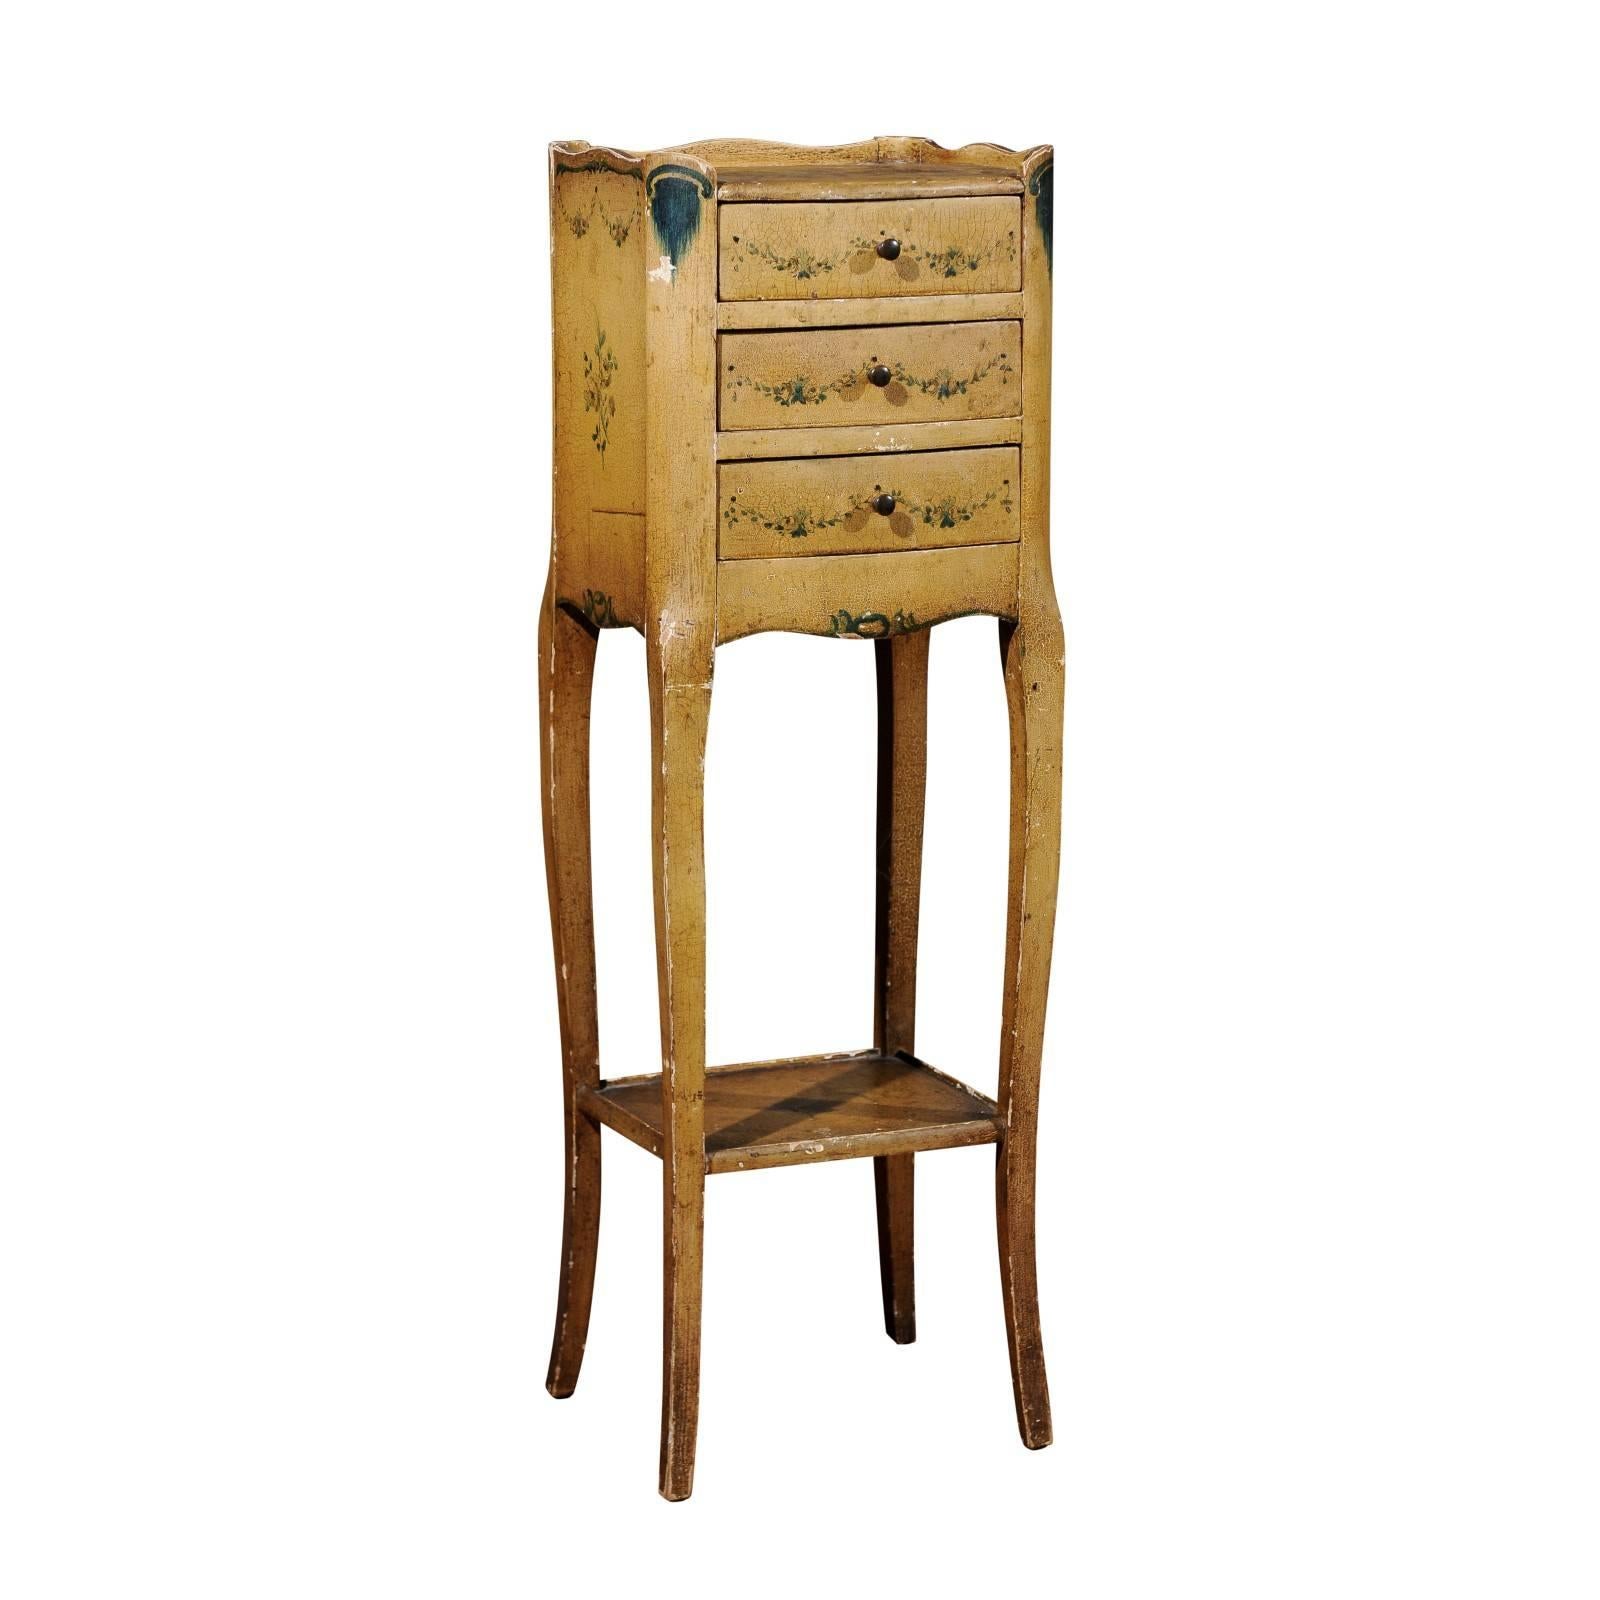 Italian 19th Century Nightstand Table with Painted Decor, Drawers and Low Shelf